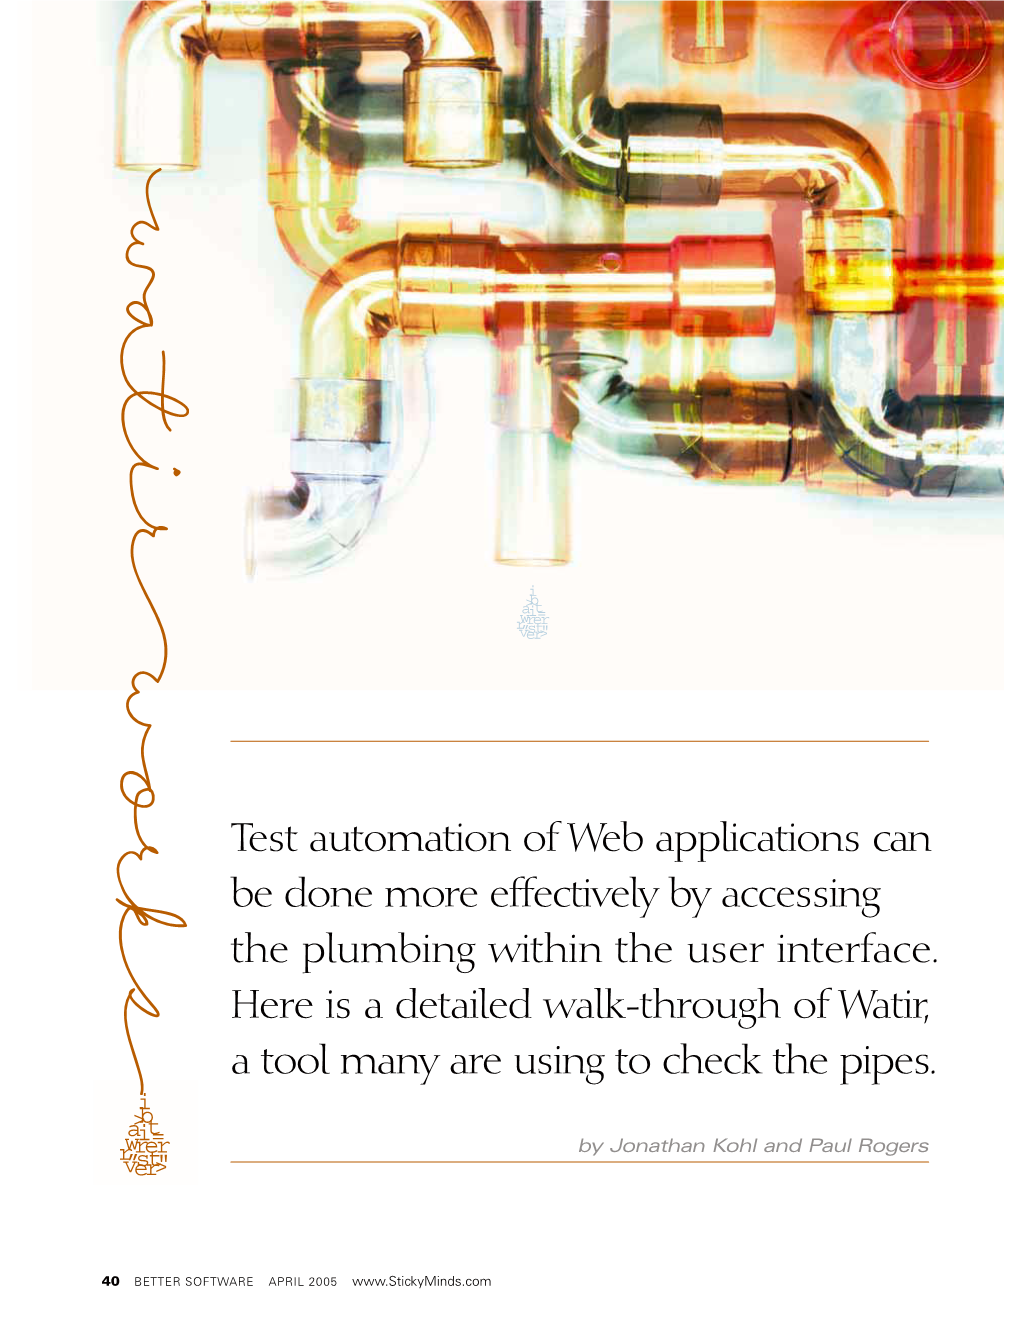 Test Automation of Web Applications Can Be Done More Effectively by Accessing the Plumbing Within the User Interface. Here Is A